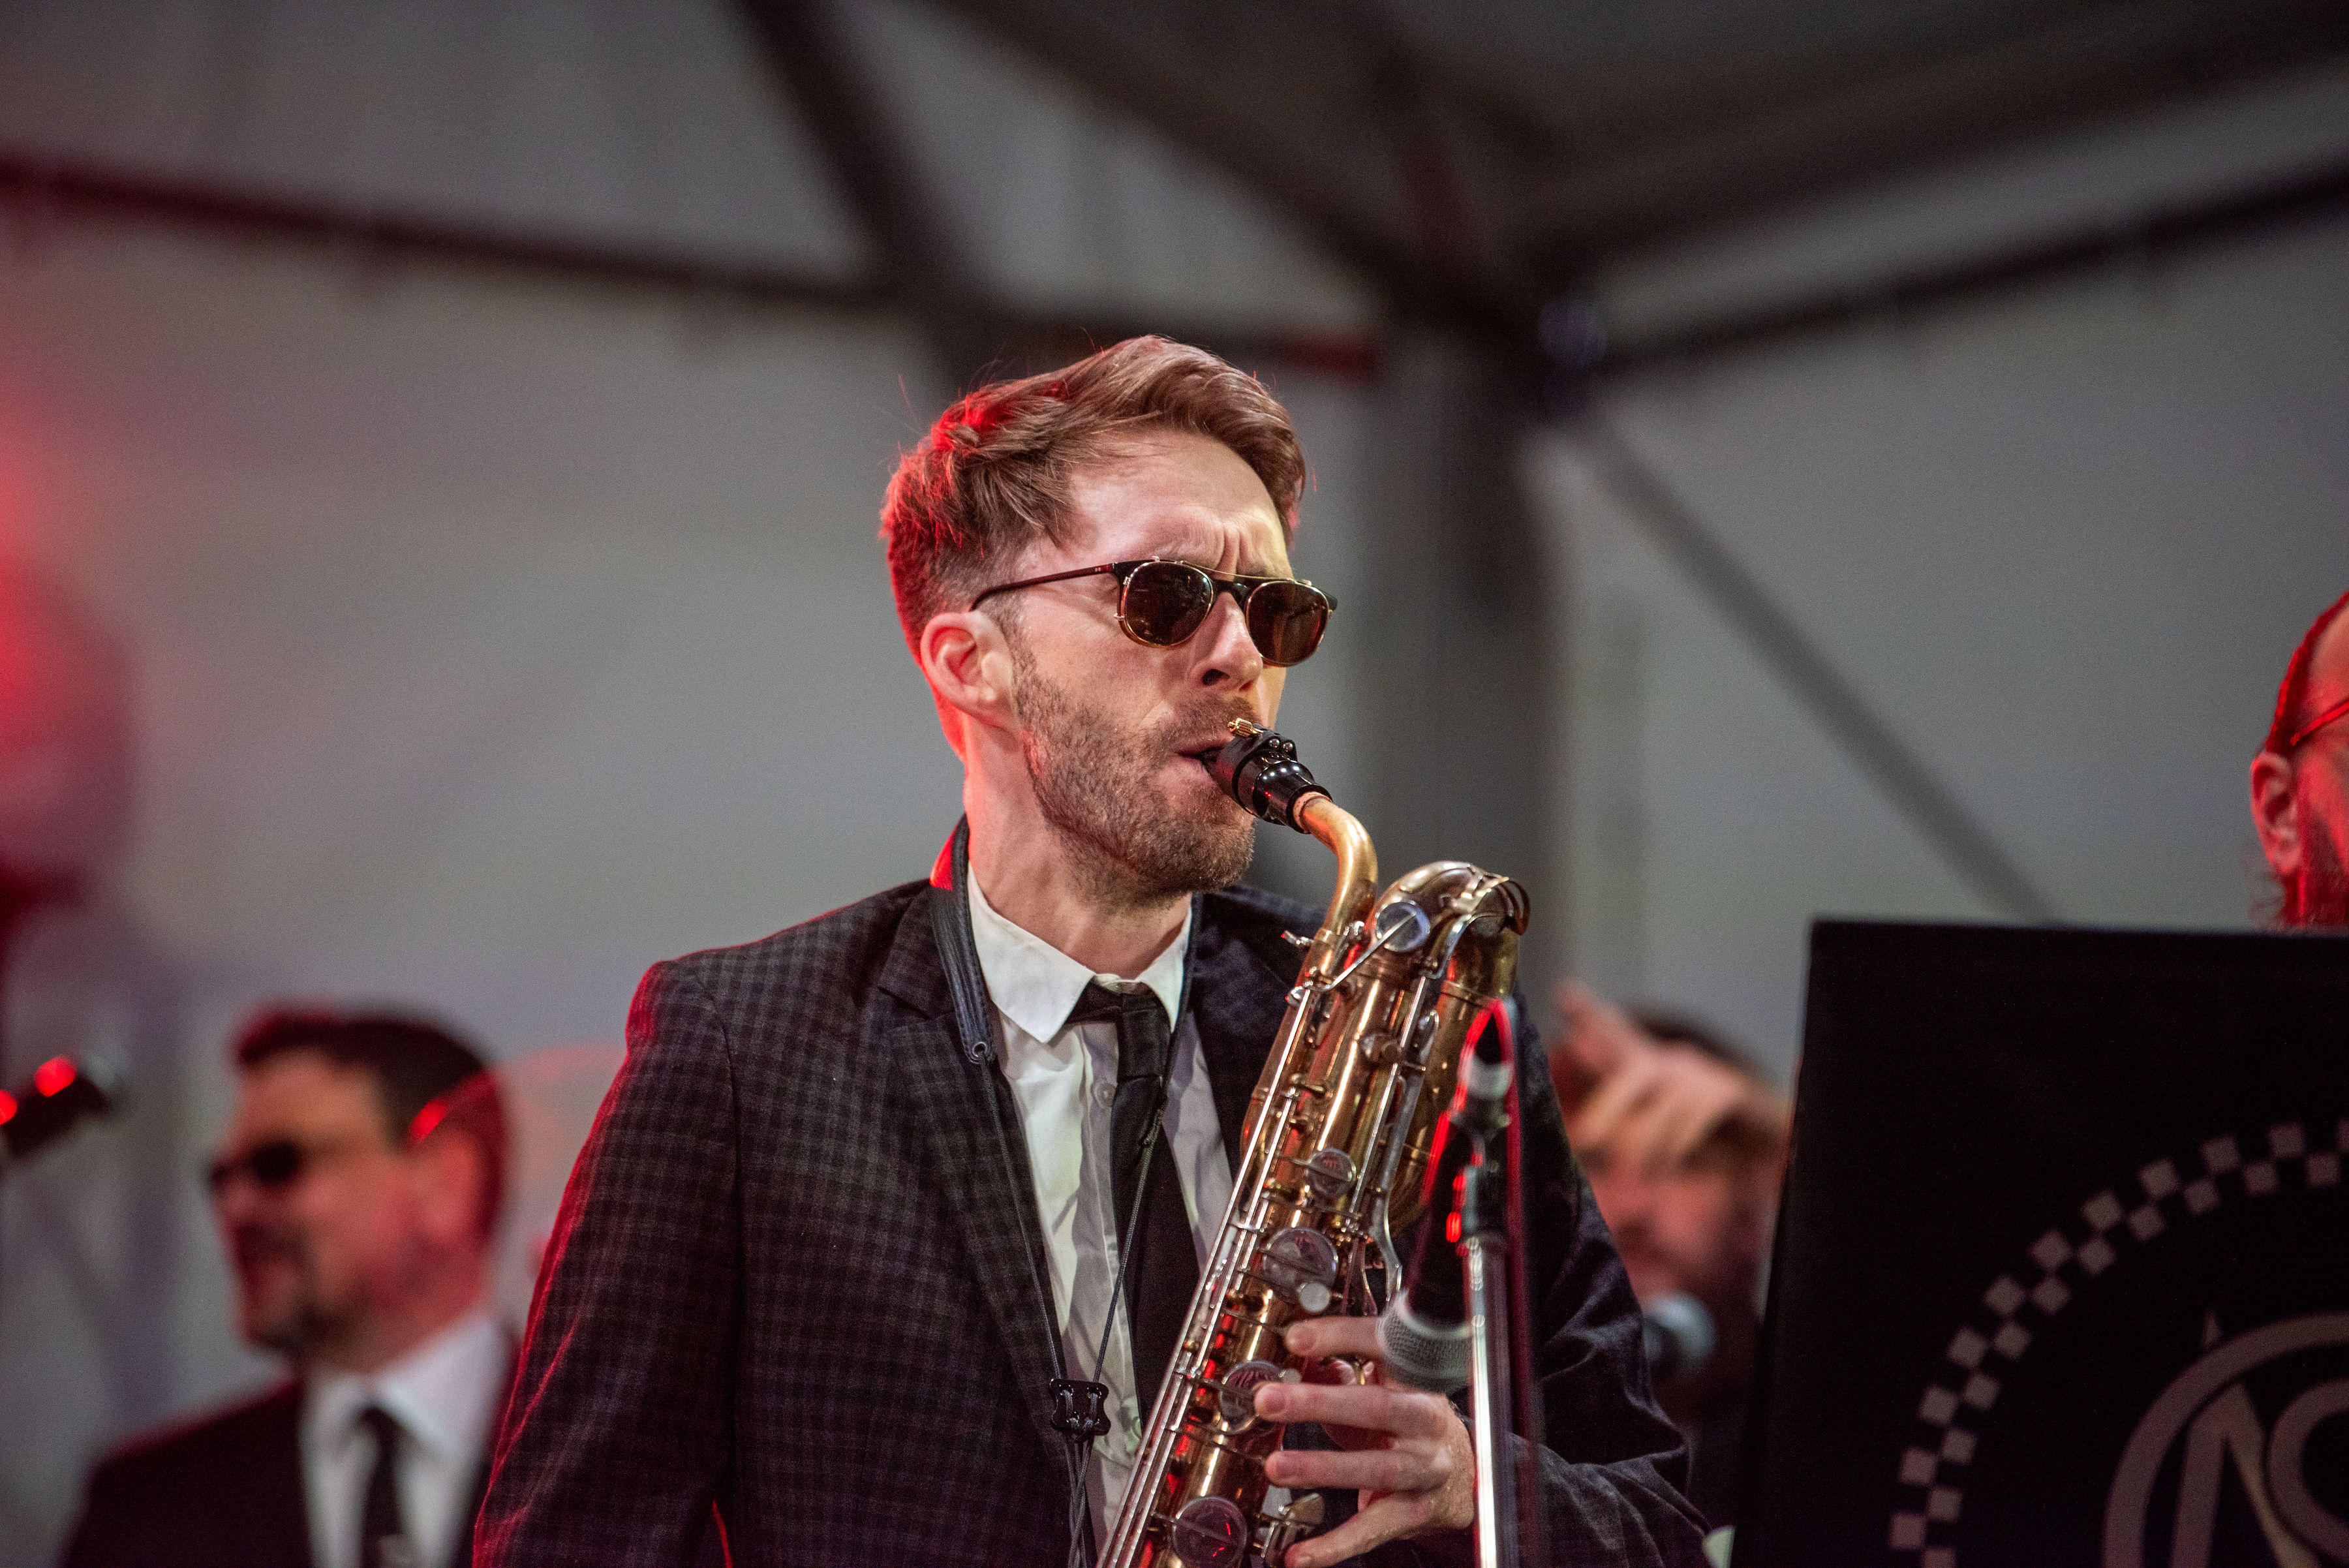 Man in suit playing the saxophone